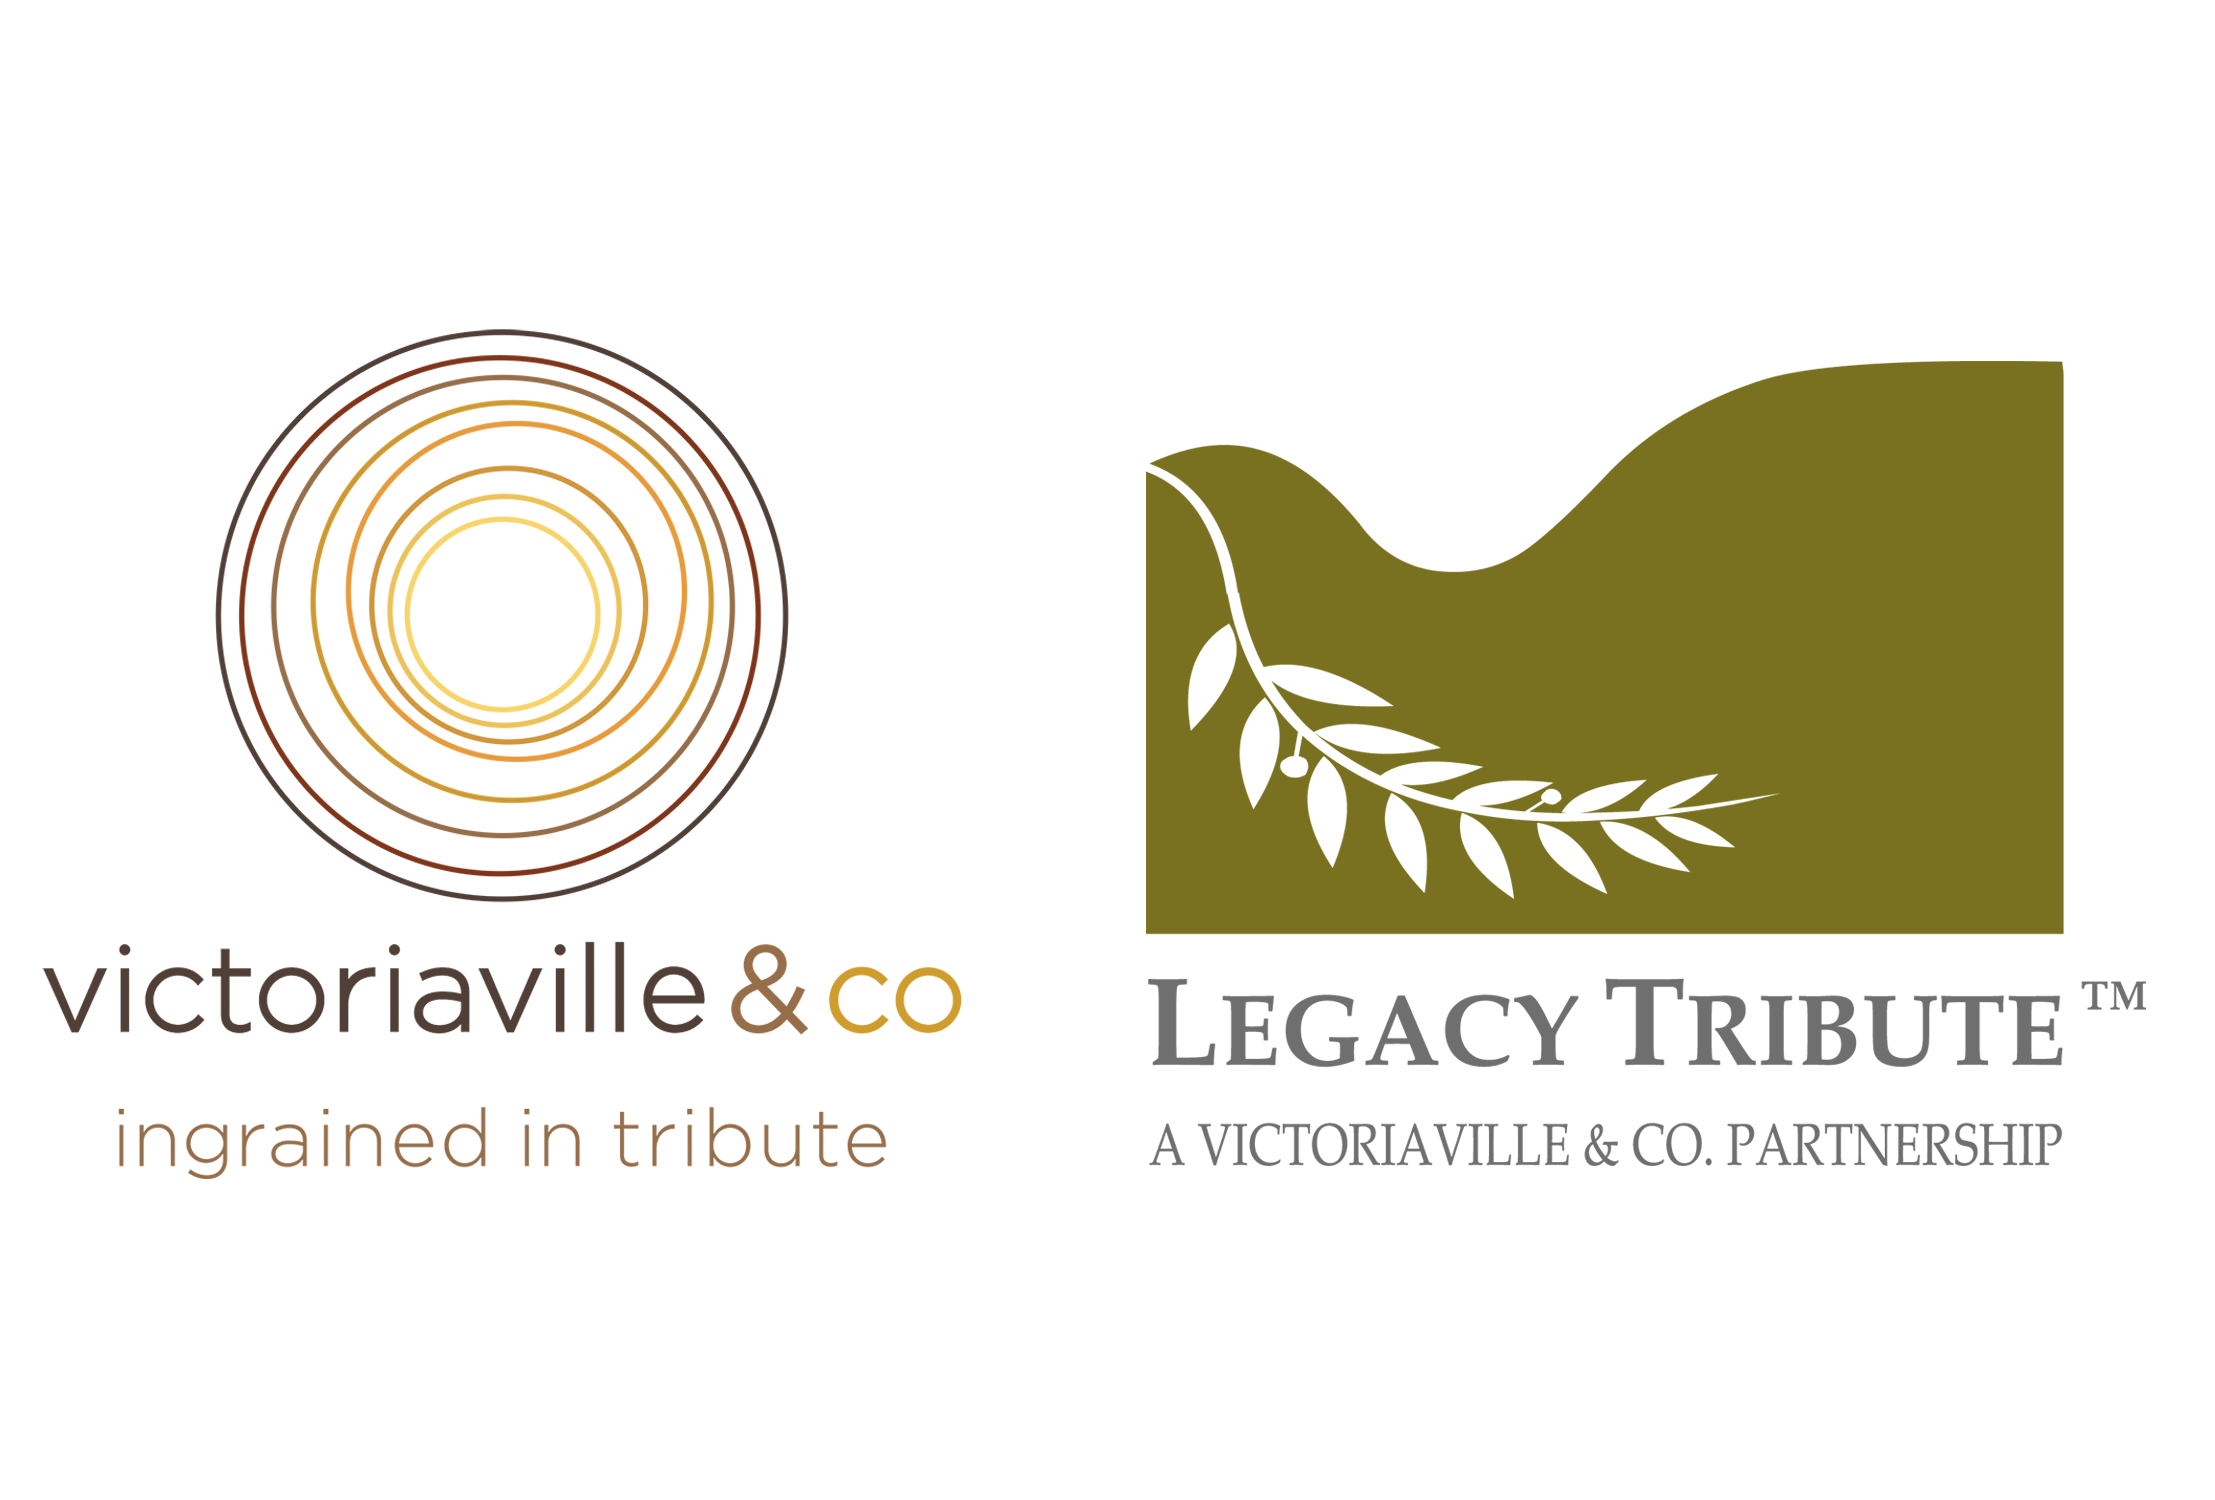 VICTORIAVILLE & CO. AND LEGACY TRIBUTE INC. ANNOUNCE PARTNERSHIP